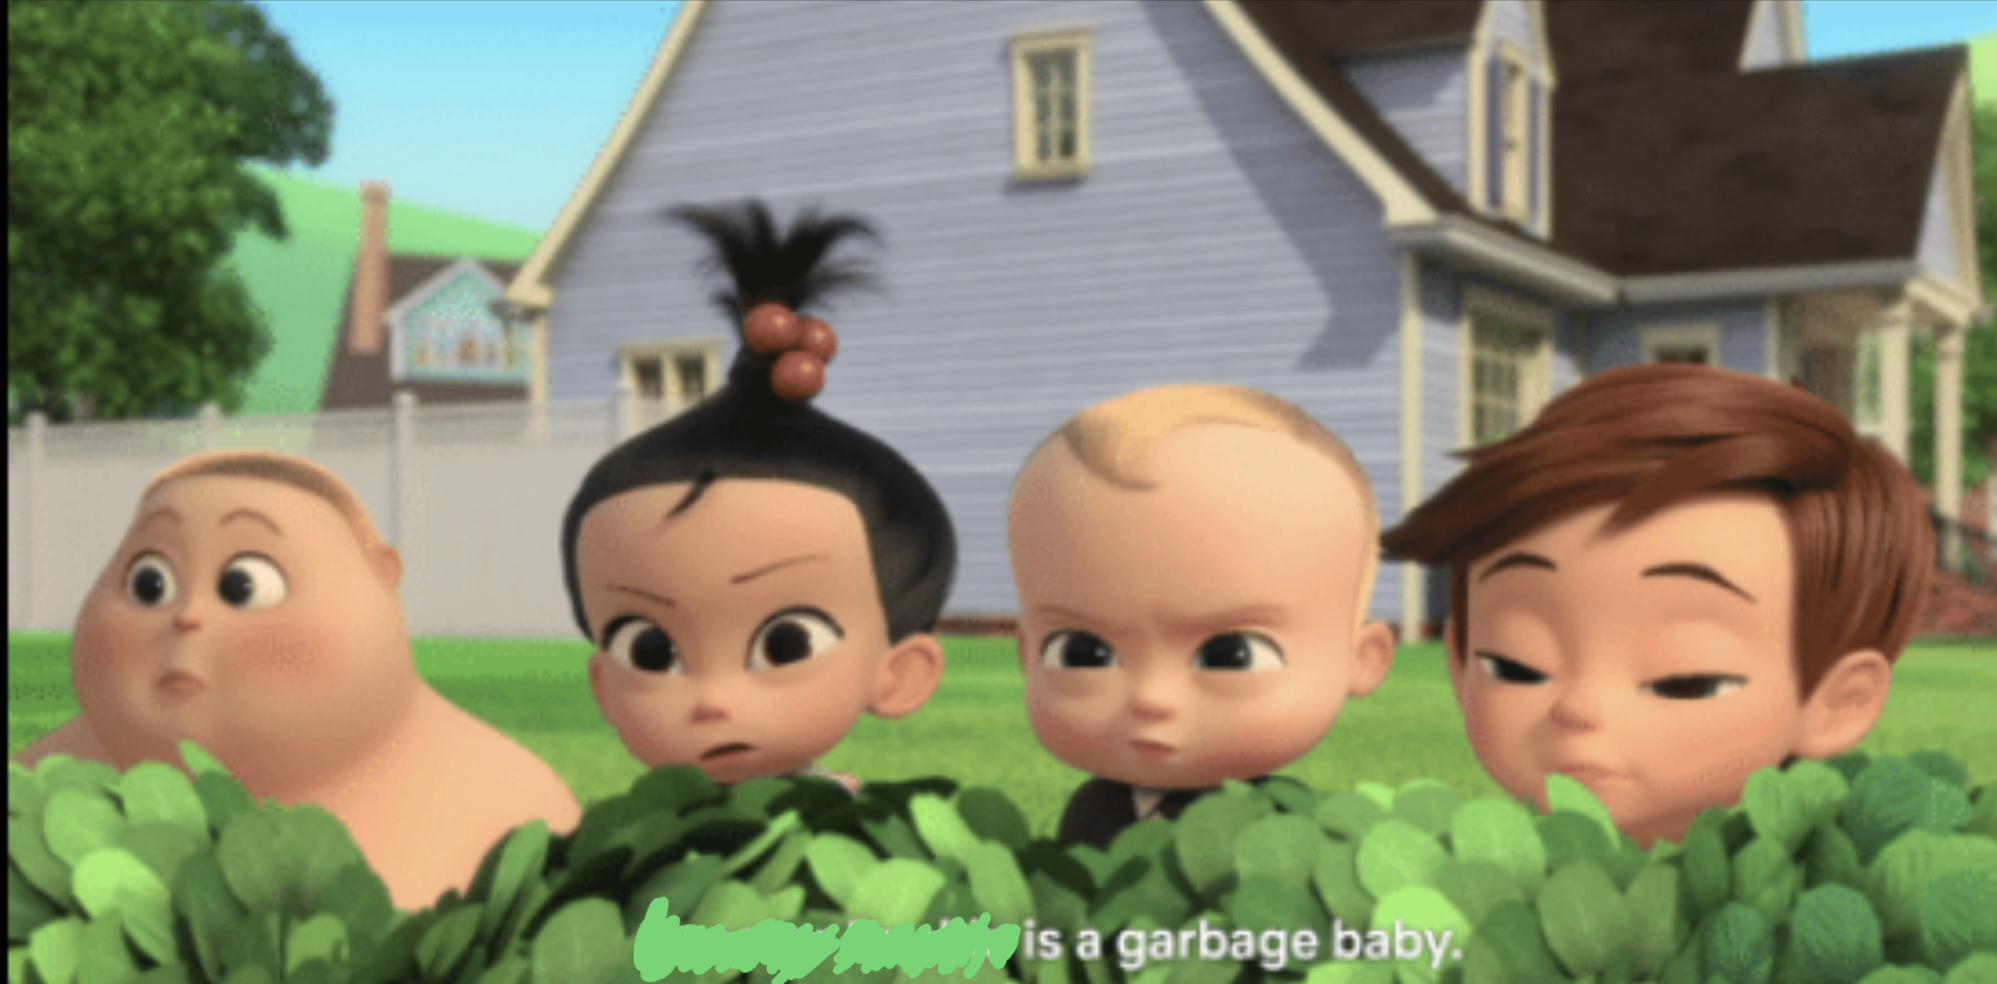 X is a garbage baby Blank Meme Template